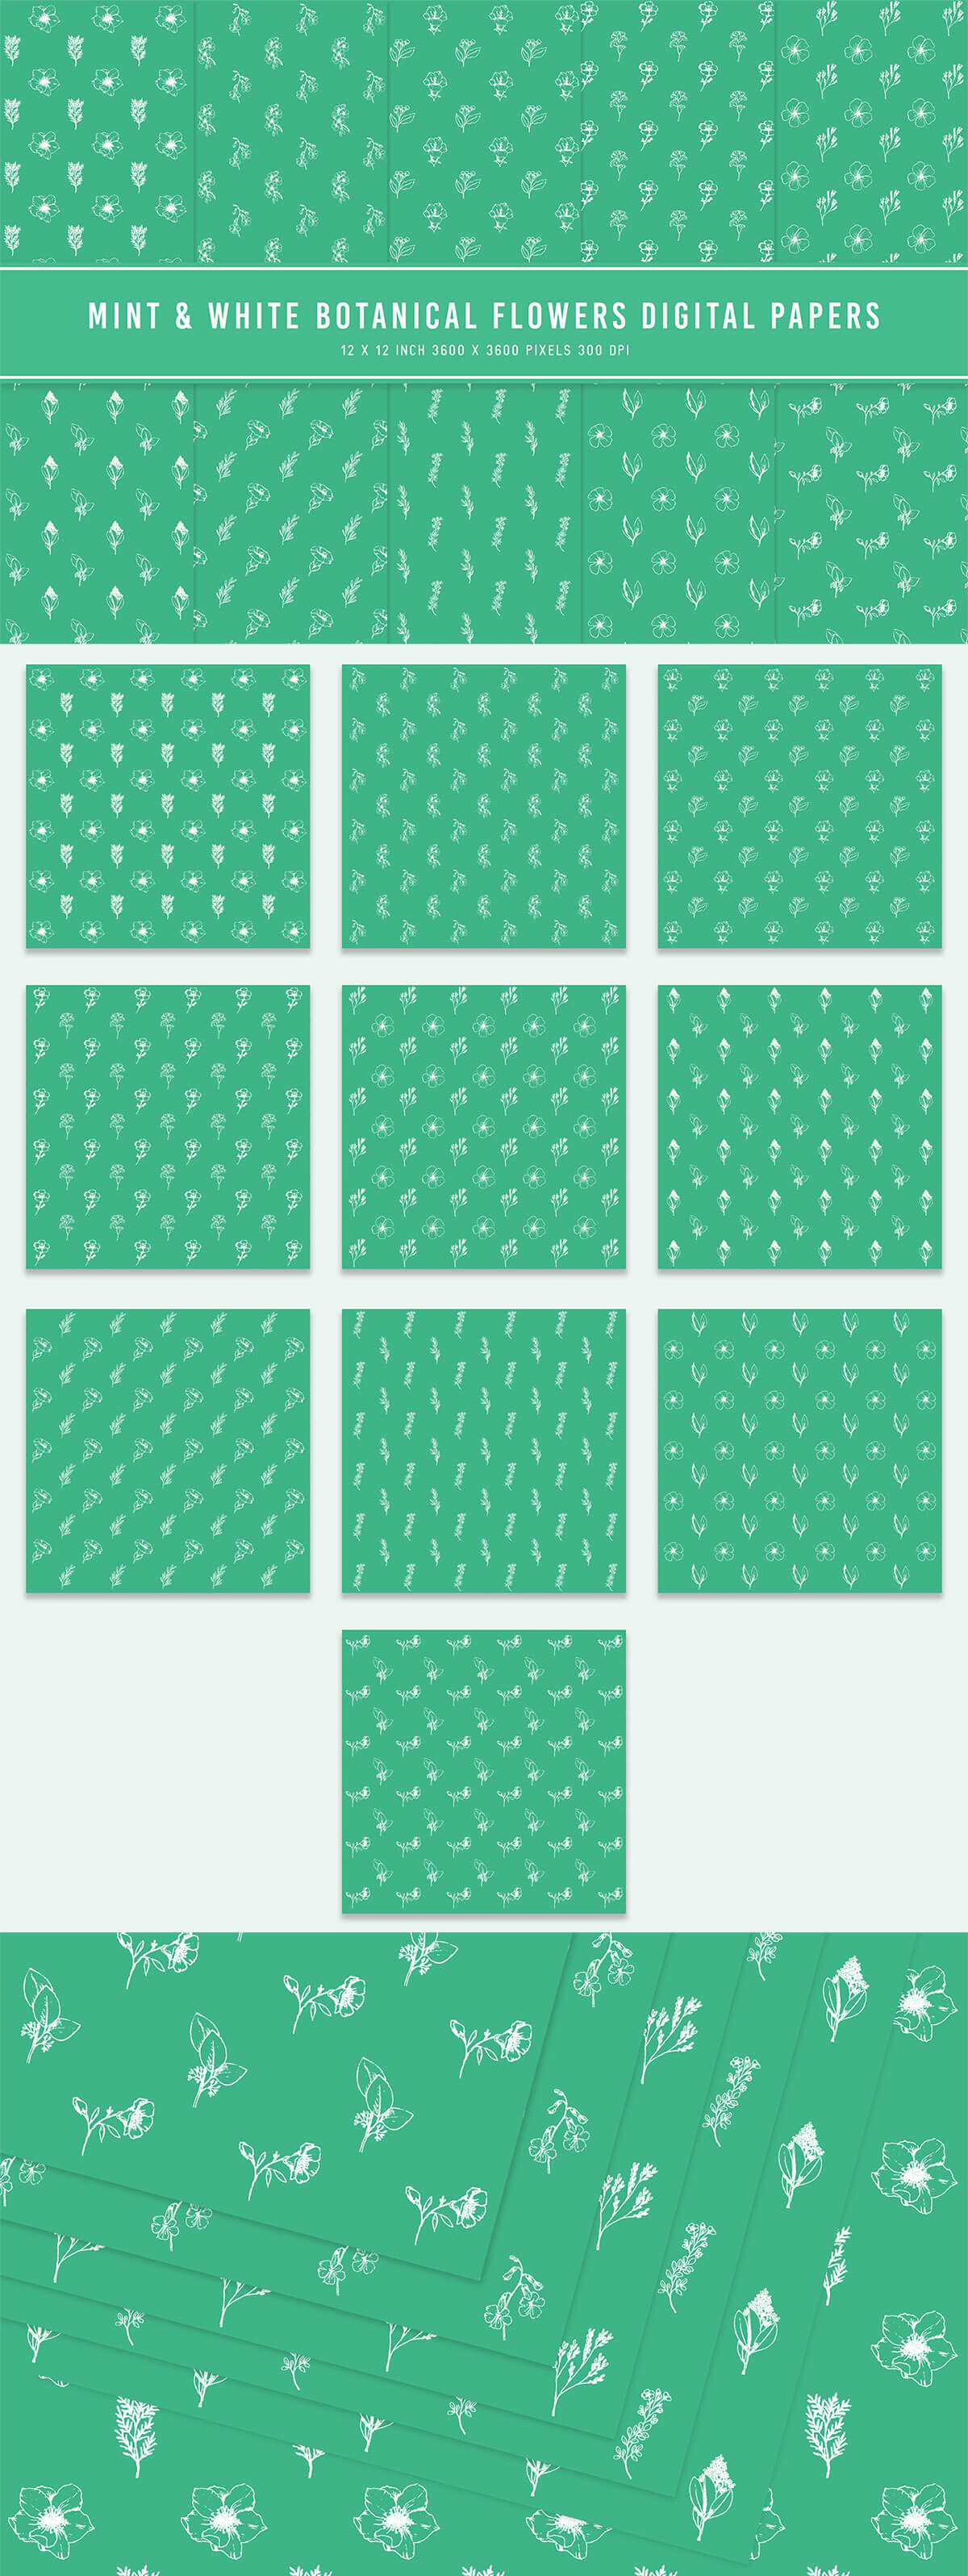 Mint & White Botanical Flowers Digital Papers